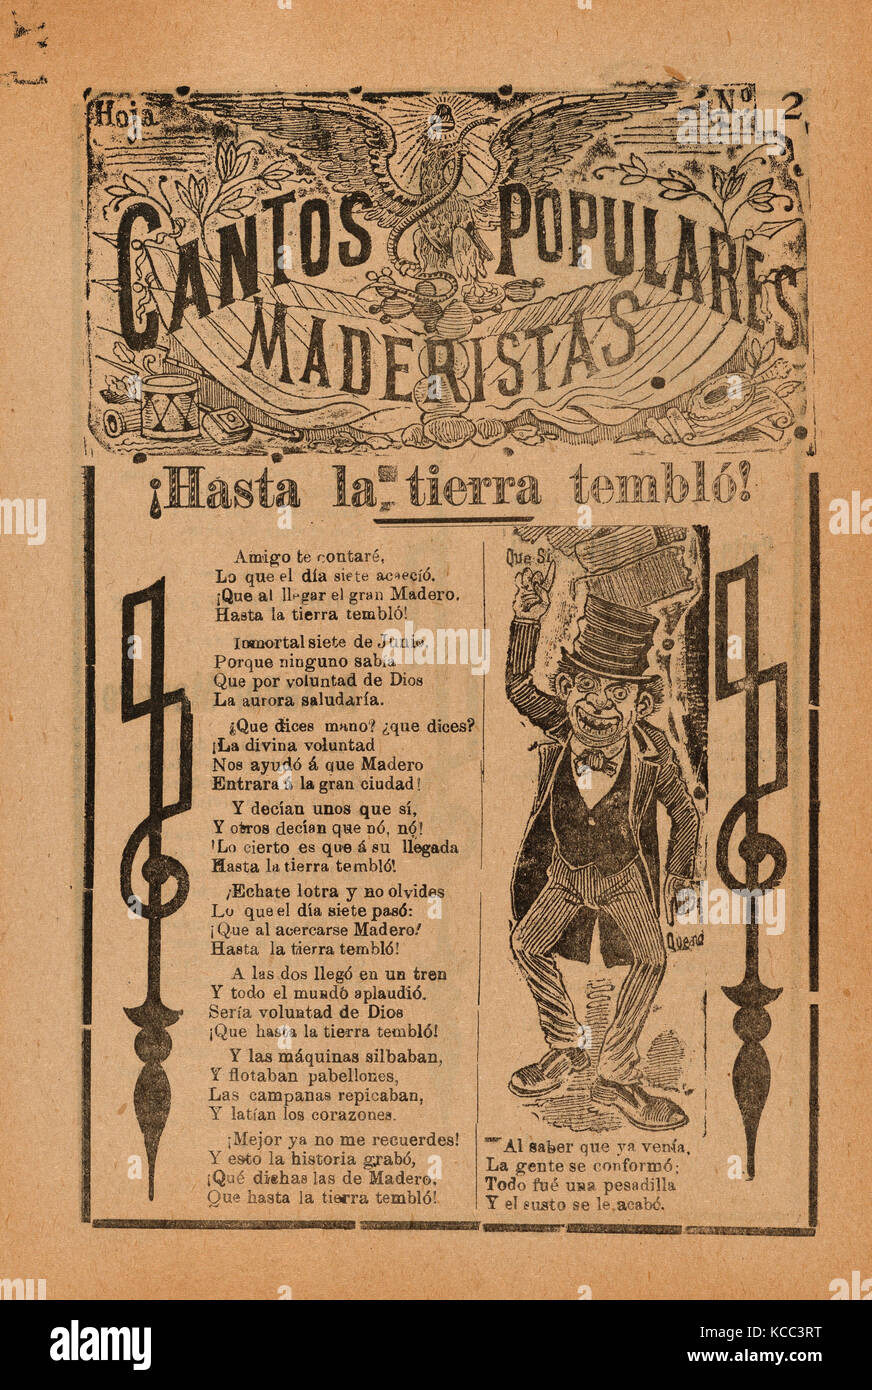 Broadsheet celebrating one of the founders of the Mexican Revolution, Francisco Madero, shown in a suit and top hat pointing to Stock Photo